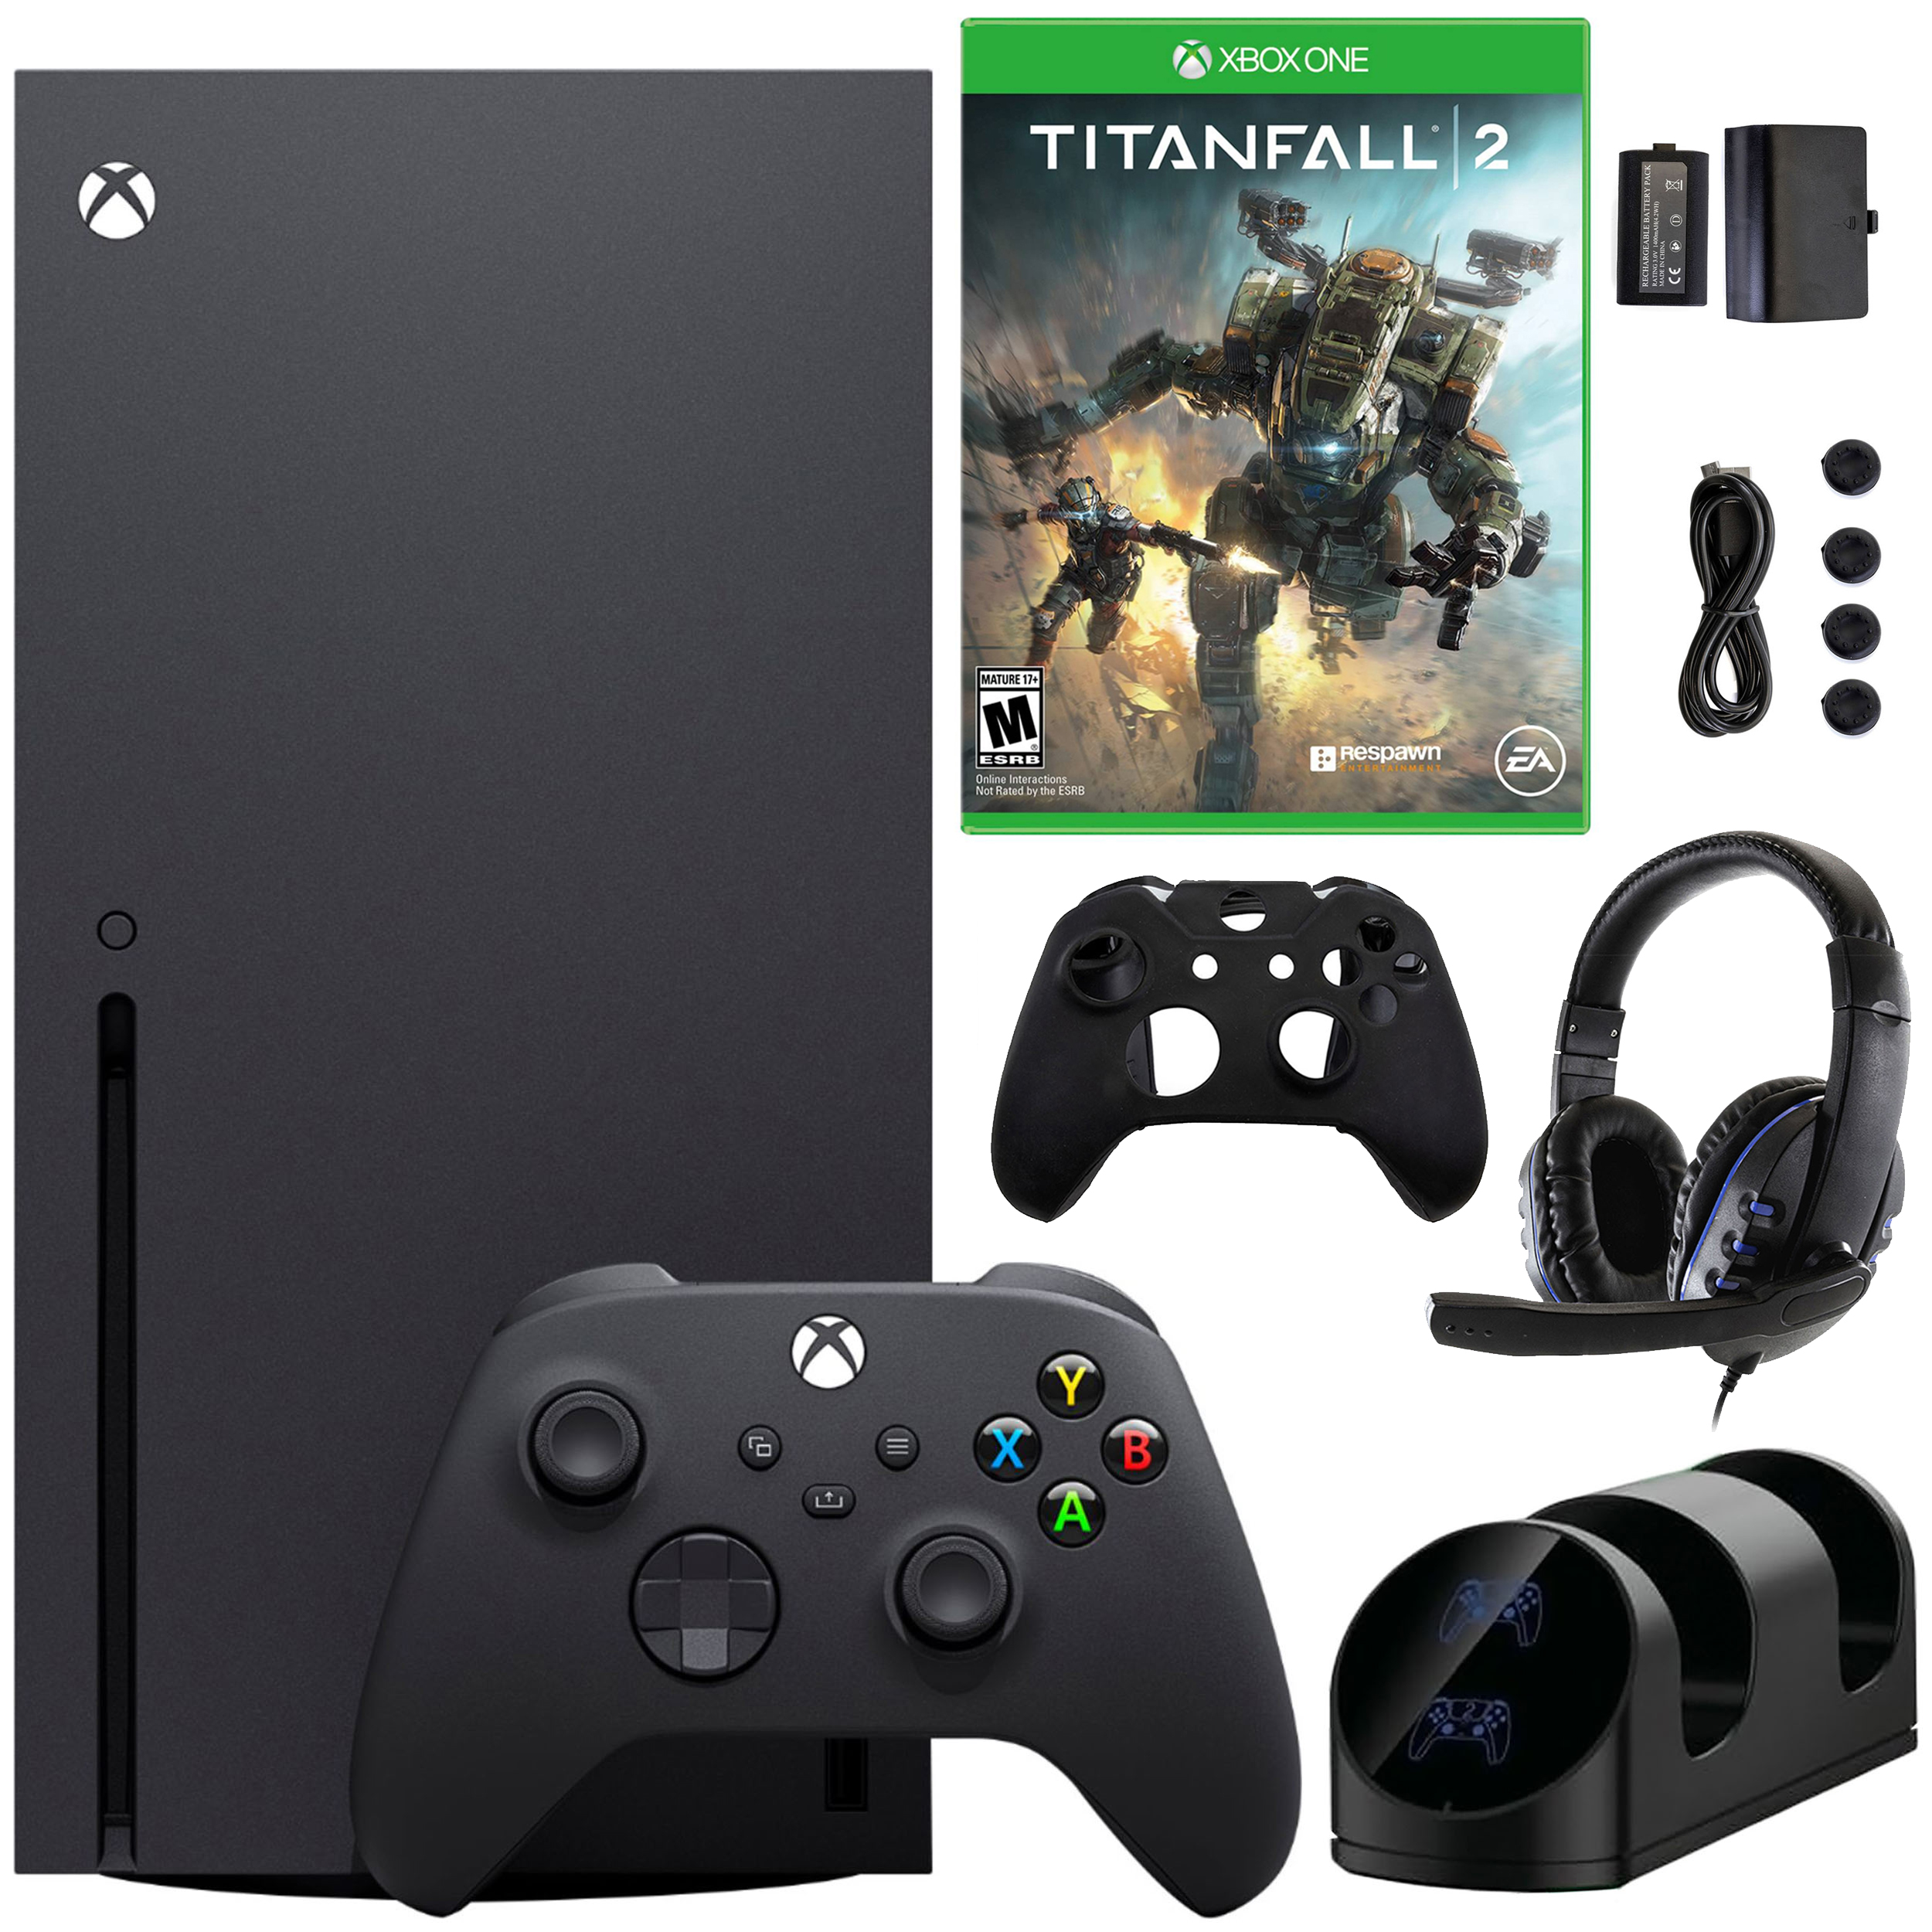 Microsoft Xbox Series X 1TB Console with Accessories Kit and Titanfall 2 Game